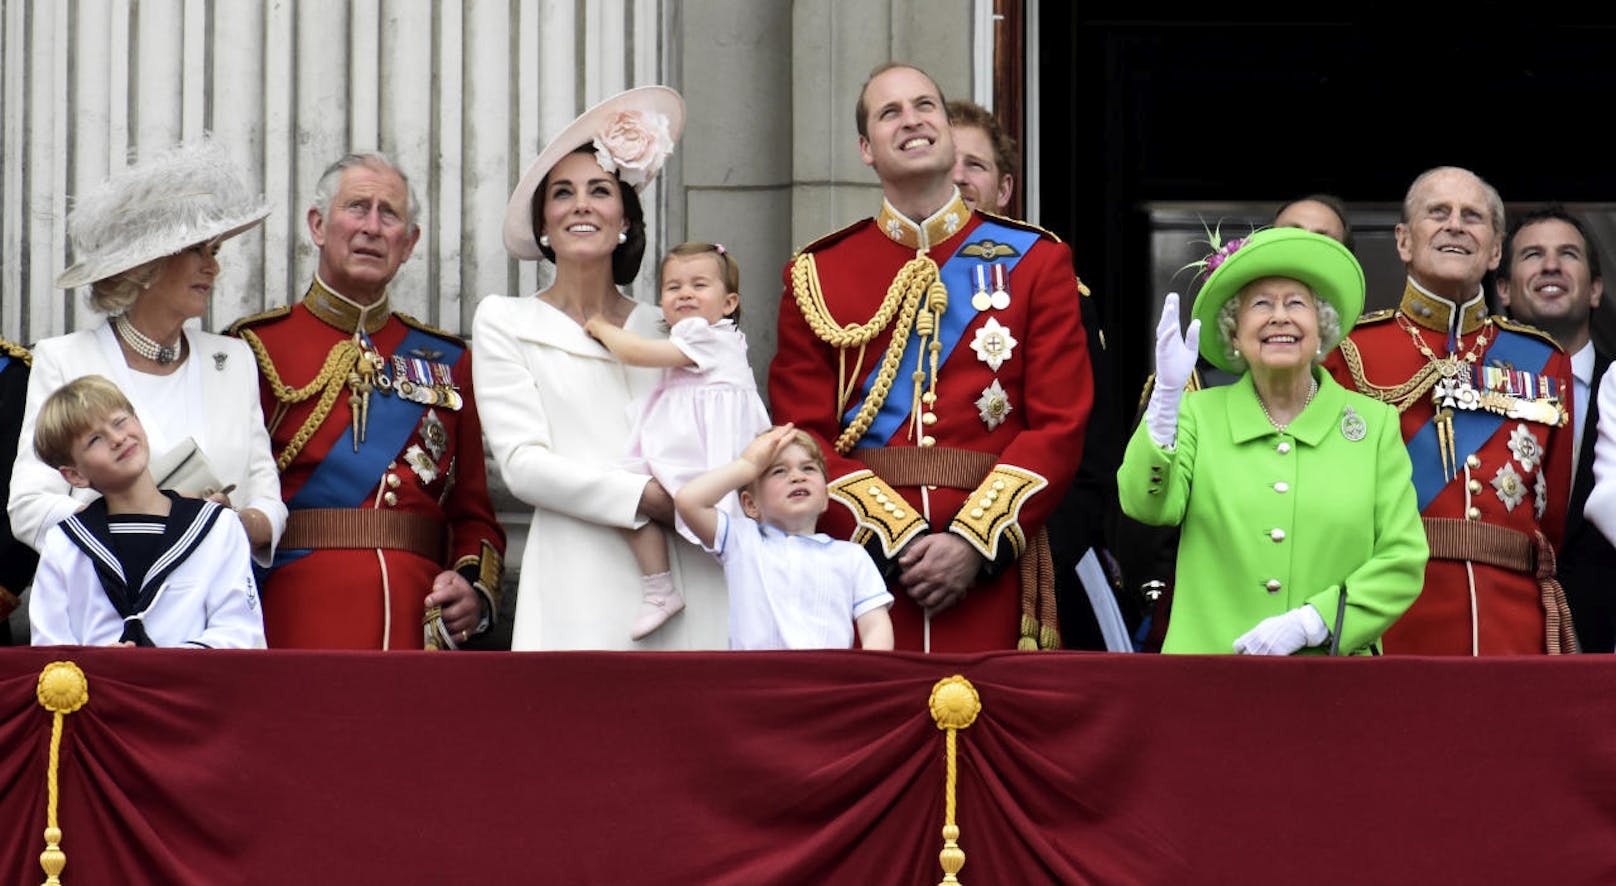 Der royale Clan am Balkon des Buckingham Palace: v.l.n.r.: Camilla, Duchess of Cornwall, Prince Charles, Catherine, Duchess of Cambridge mit Princess Charlotte im Arm, Prince George, Prince William, Queen Elizabeth undd Prince Philip (Trooping the Colour 2016)